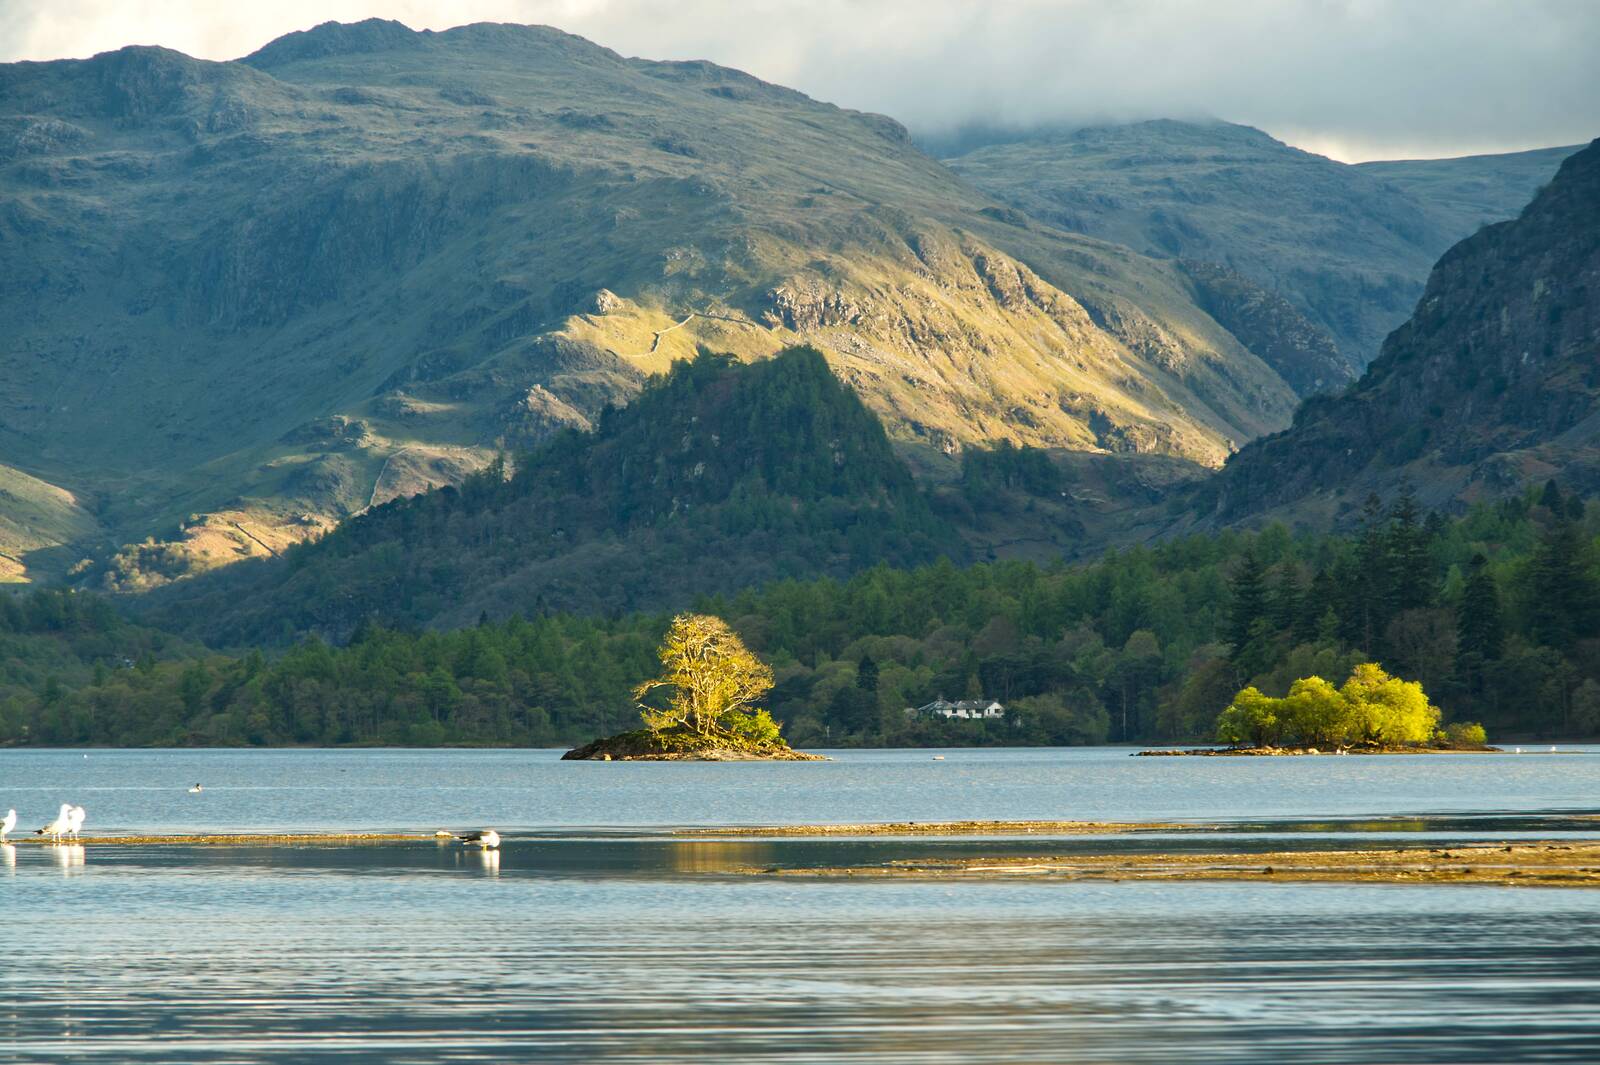 Image of Isthmus Bay, Derwent Water by Philip Eptlett